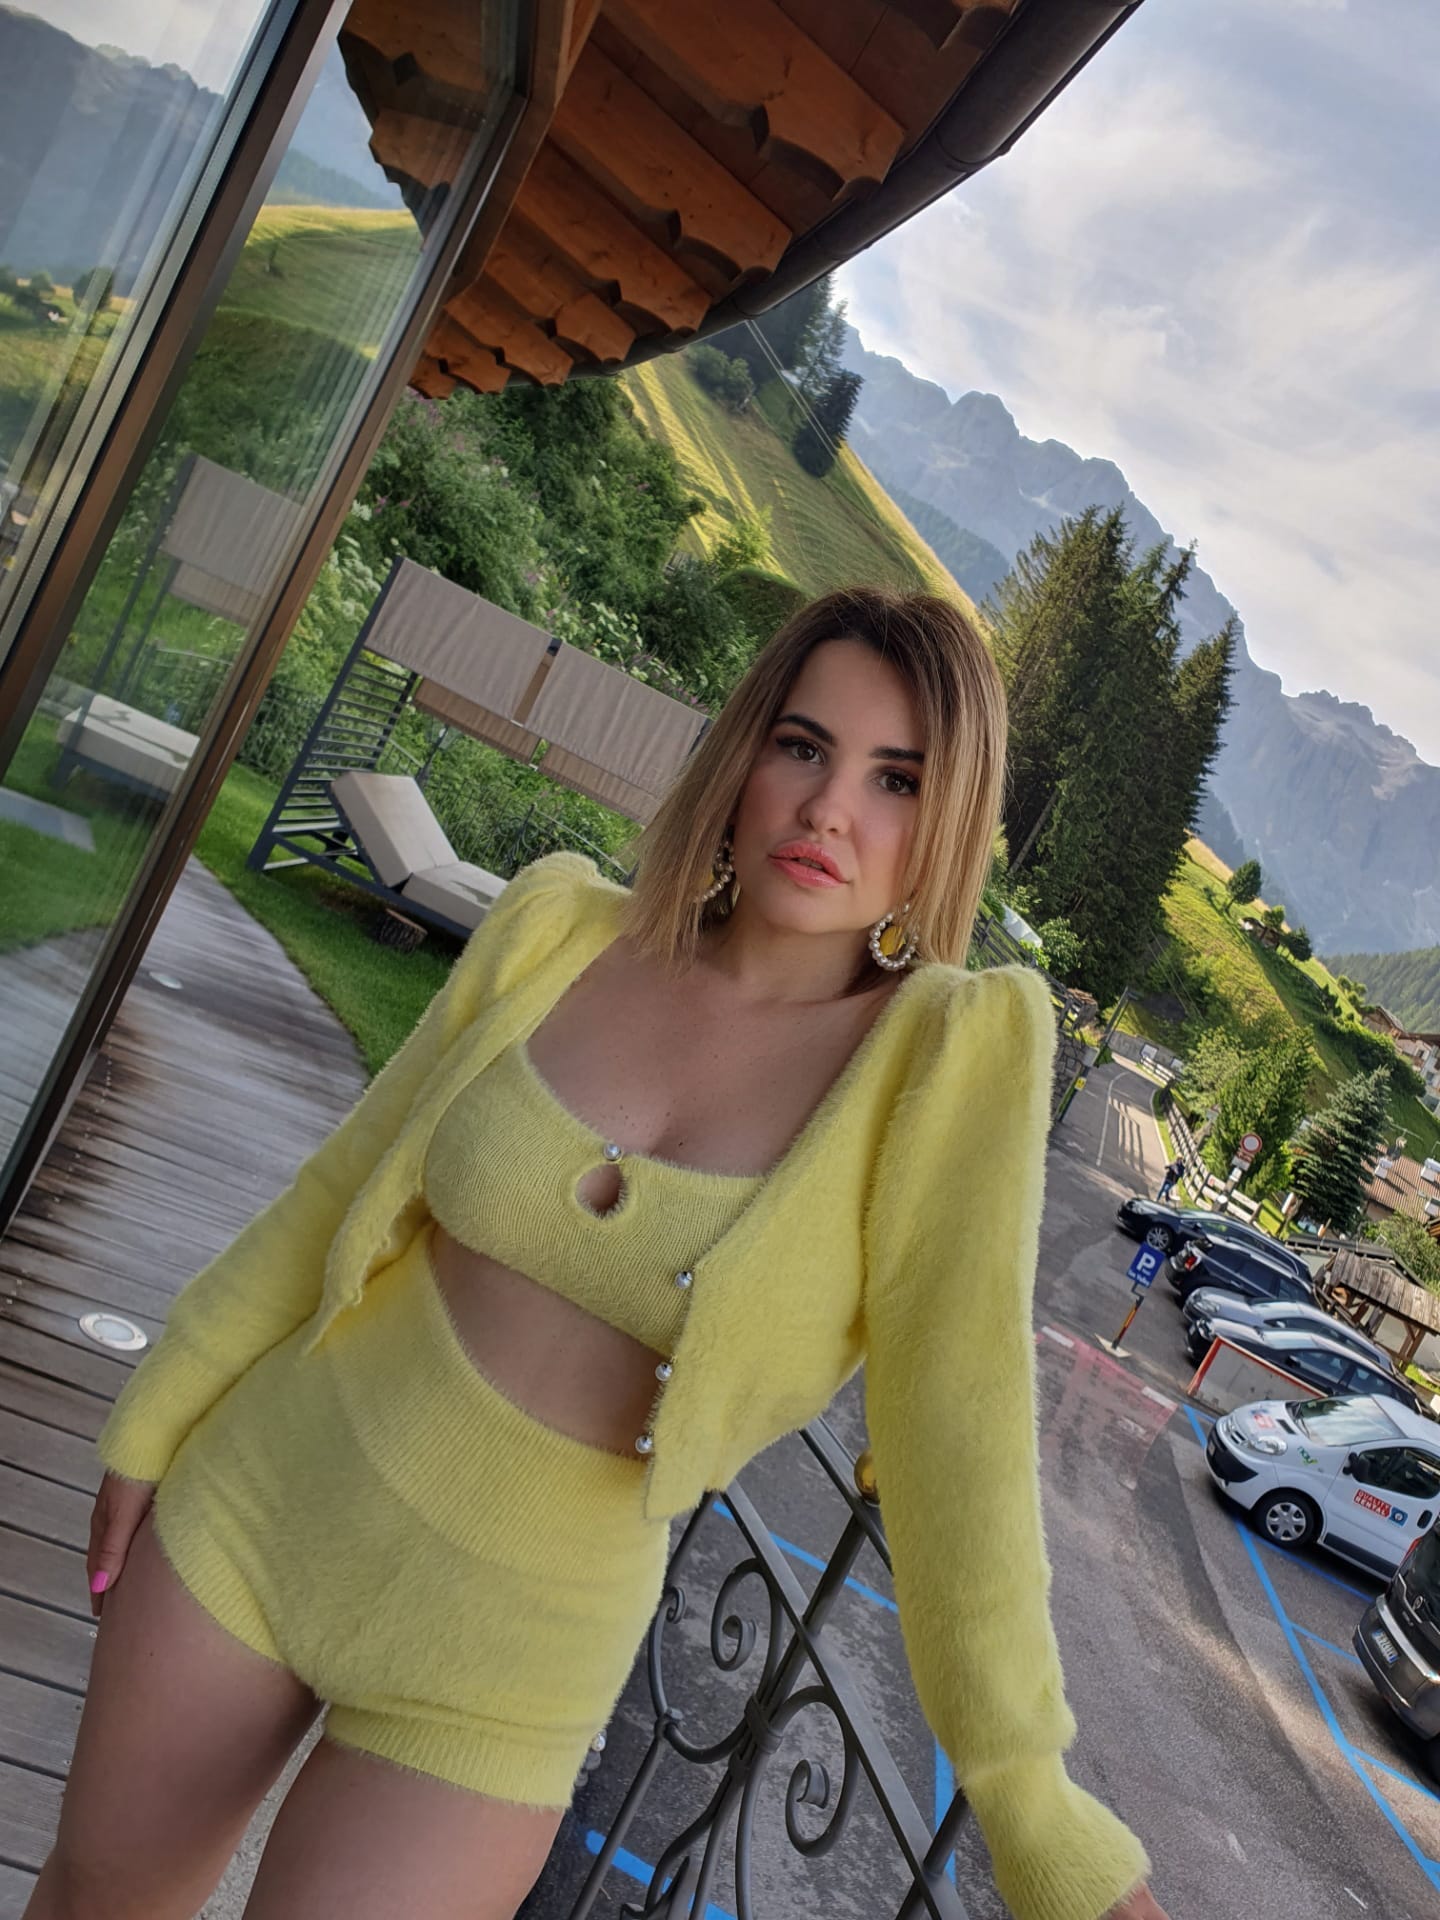 The influencer Carolina Ogliaro makes us dream with her holidays in the Dolomites, South Tyrol, and…